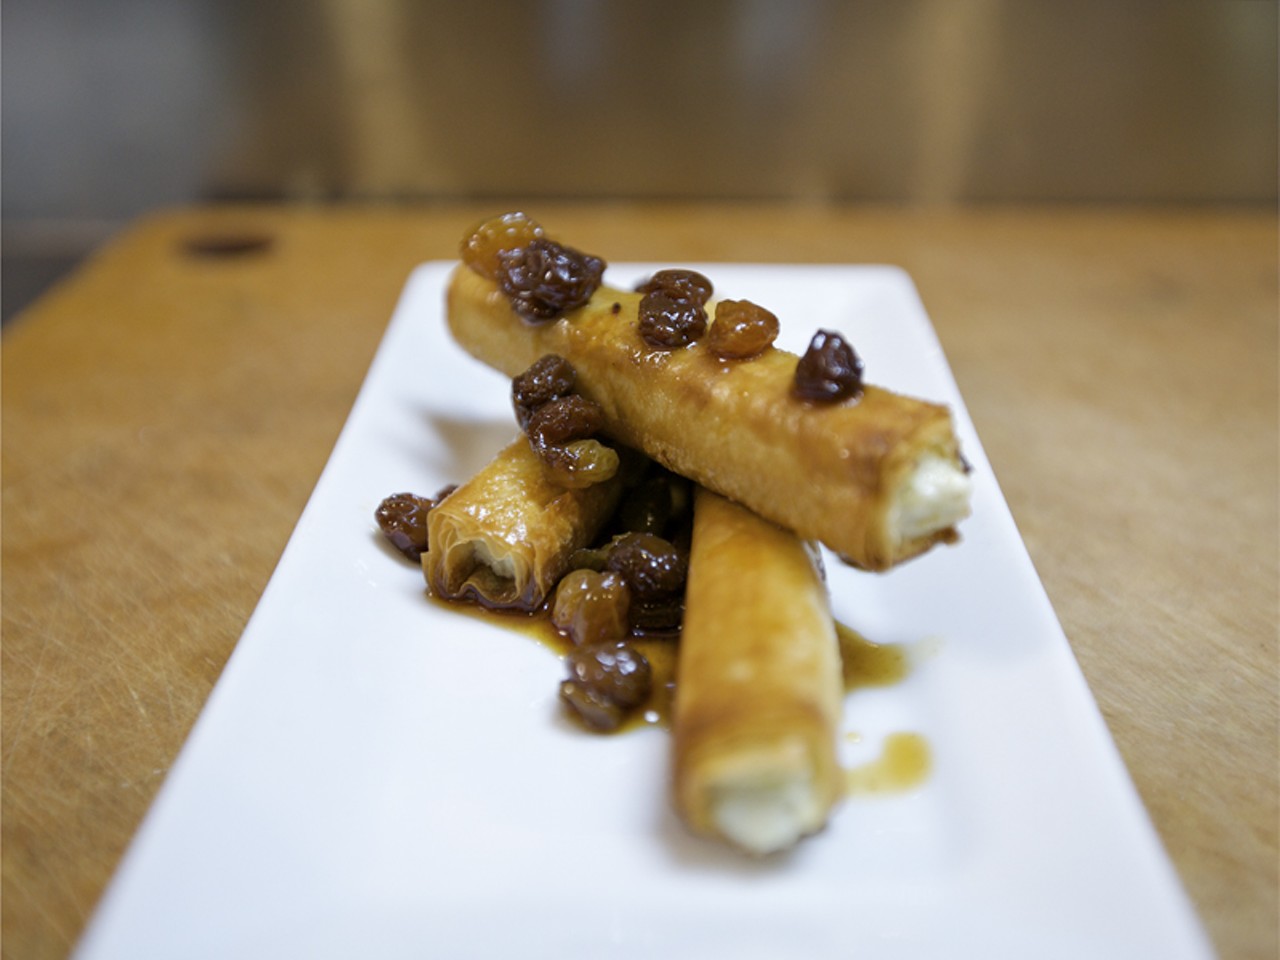 Cabrales Cigars are Spanish blue cheese and leek fondue, rolled into phyllo &ldquo;cigars&rdquo; and then baked and drizzled with sherry-raisin dipping sauce.